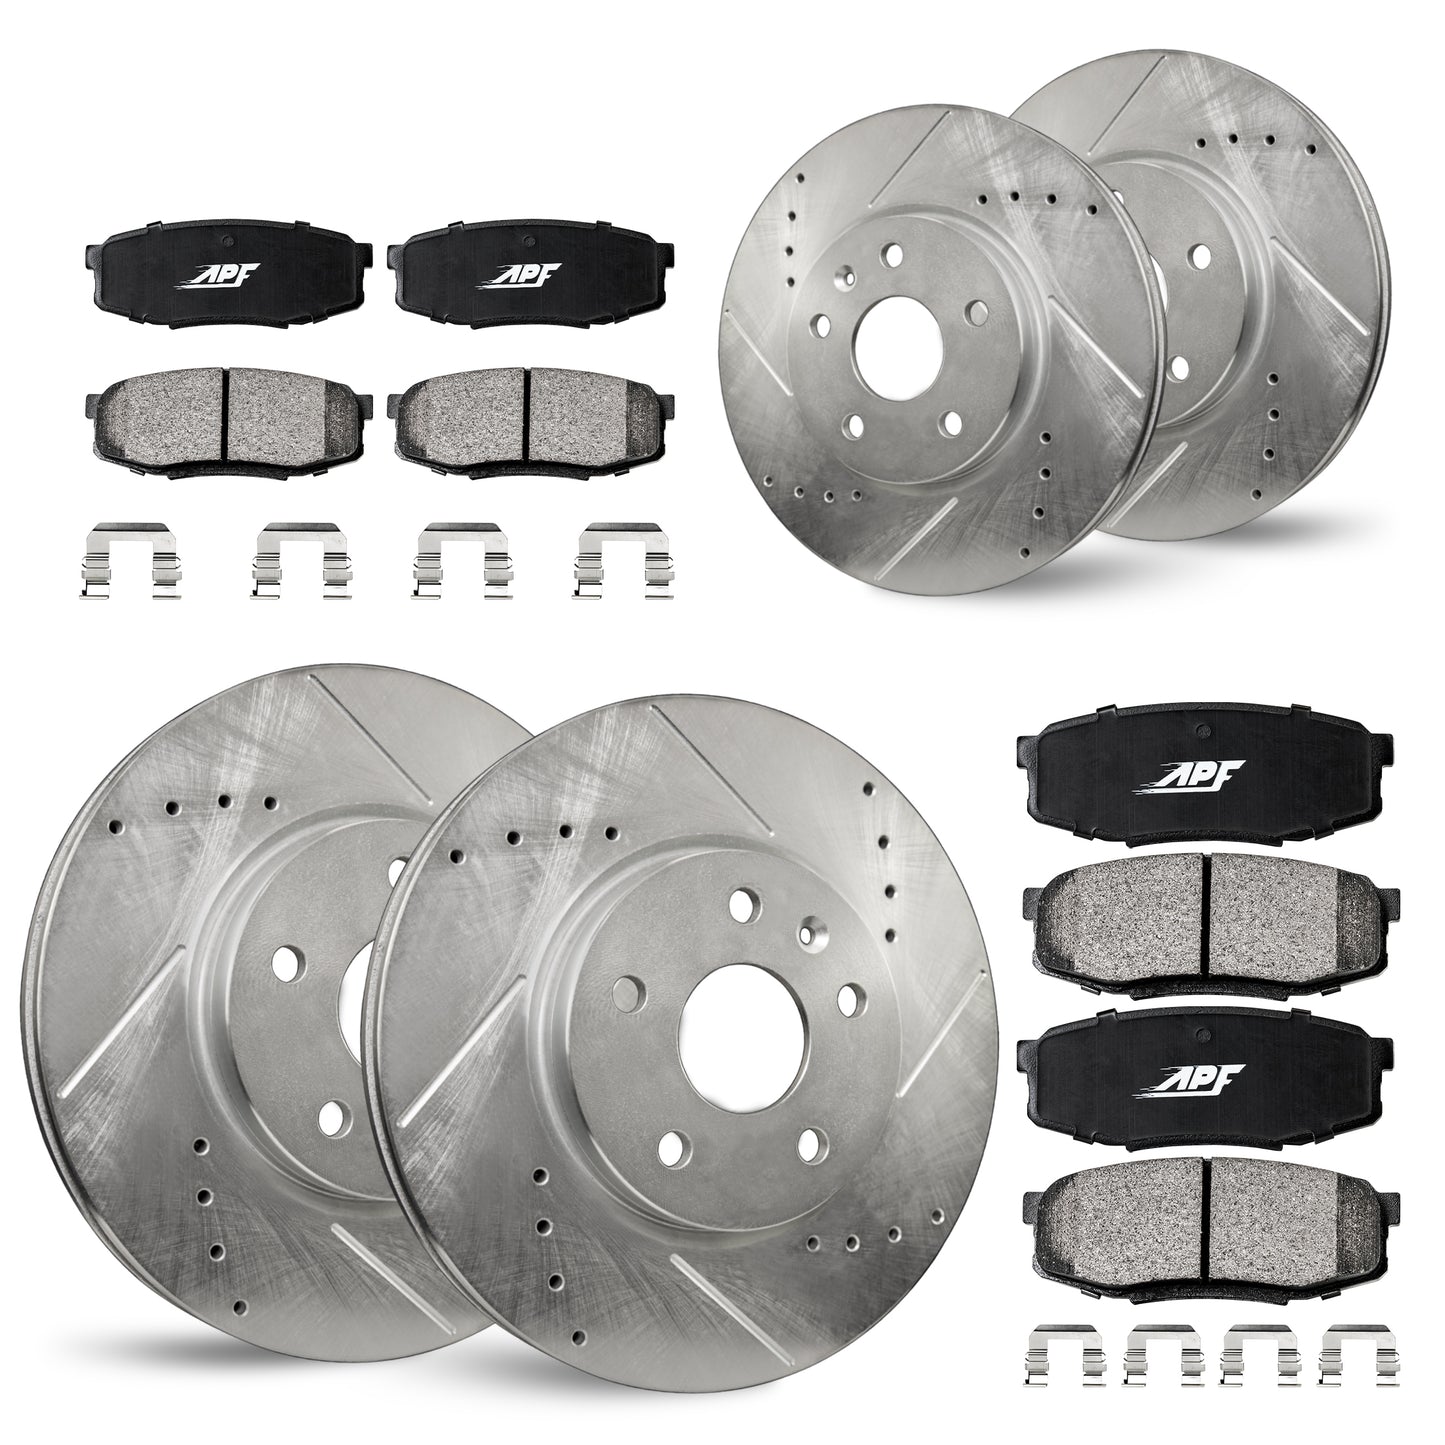 APF Full Kit compatible with Chevrolet Blazer 1997-2005 | Zinc Drilled Slotted Rotors with Ceramic Carbon Fiber Brake Pads